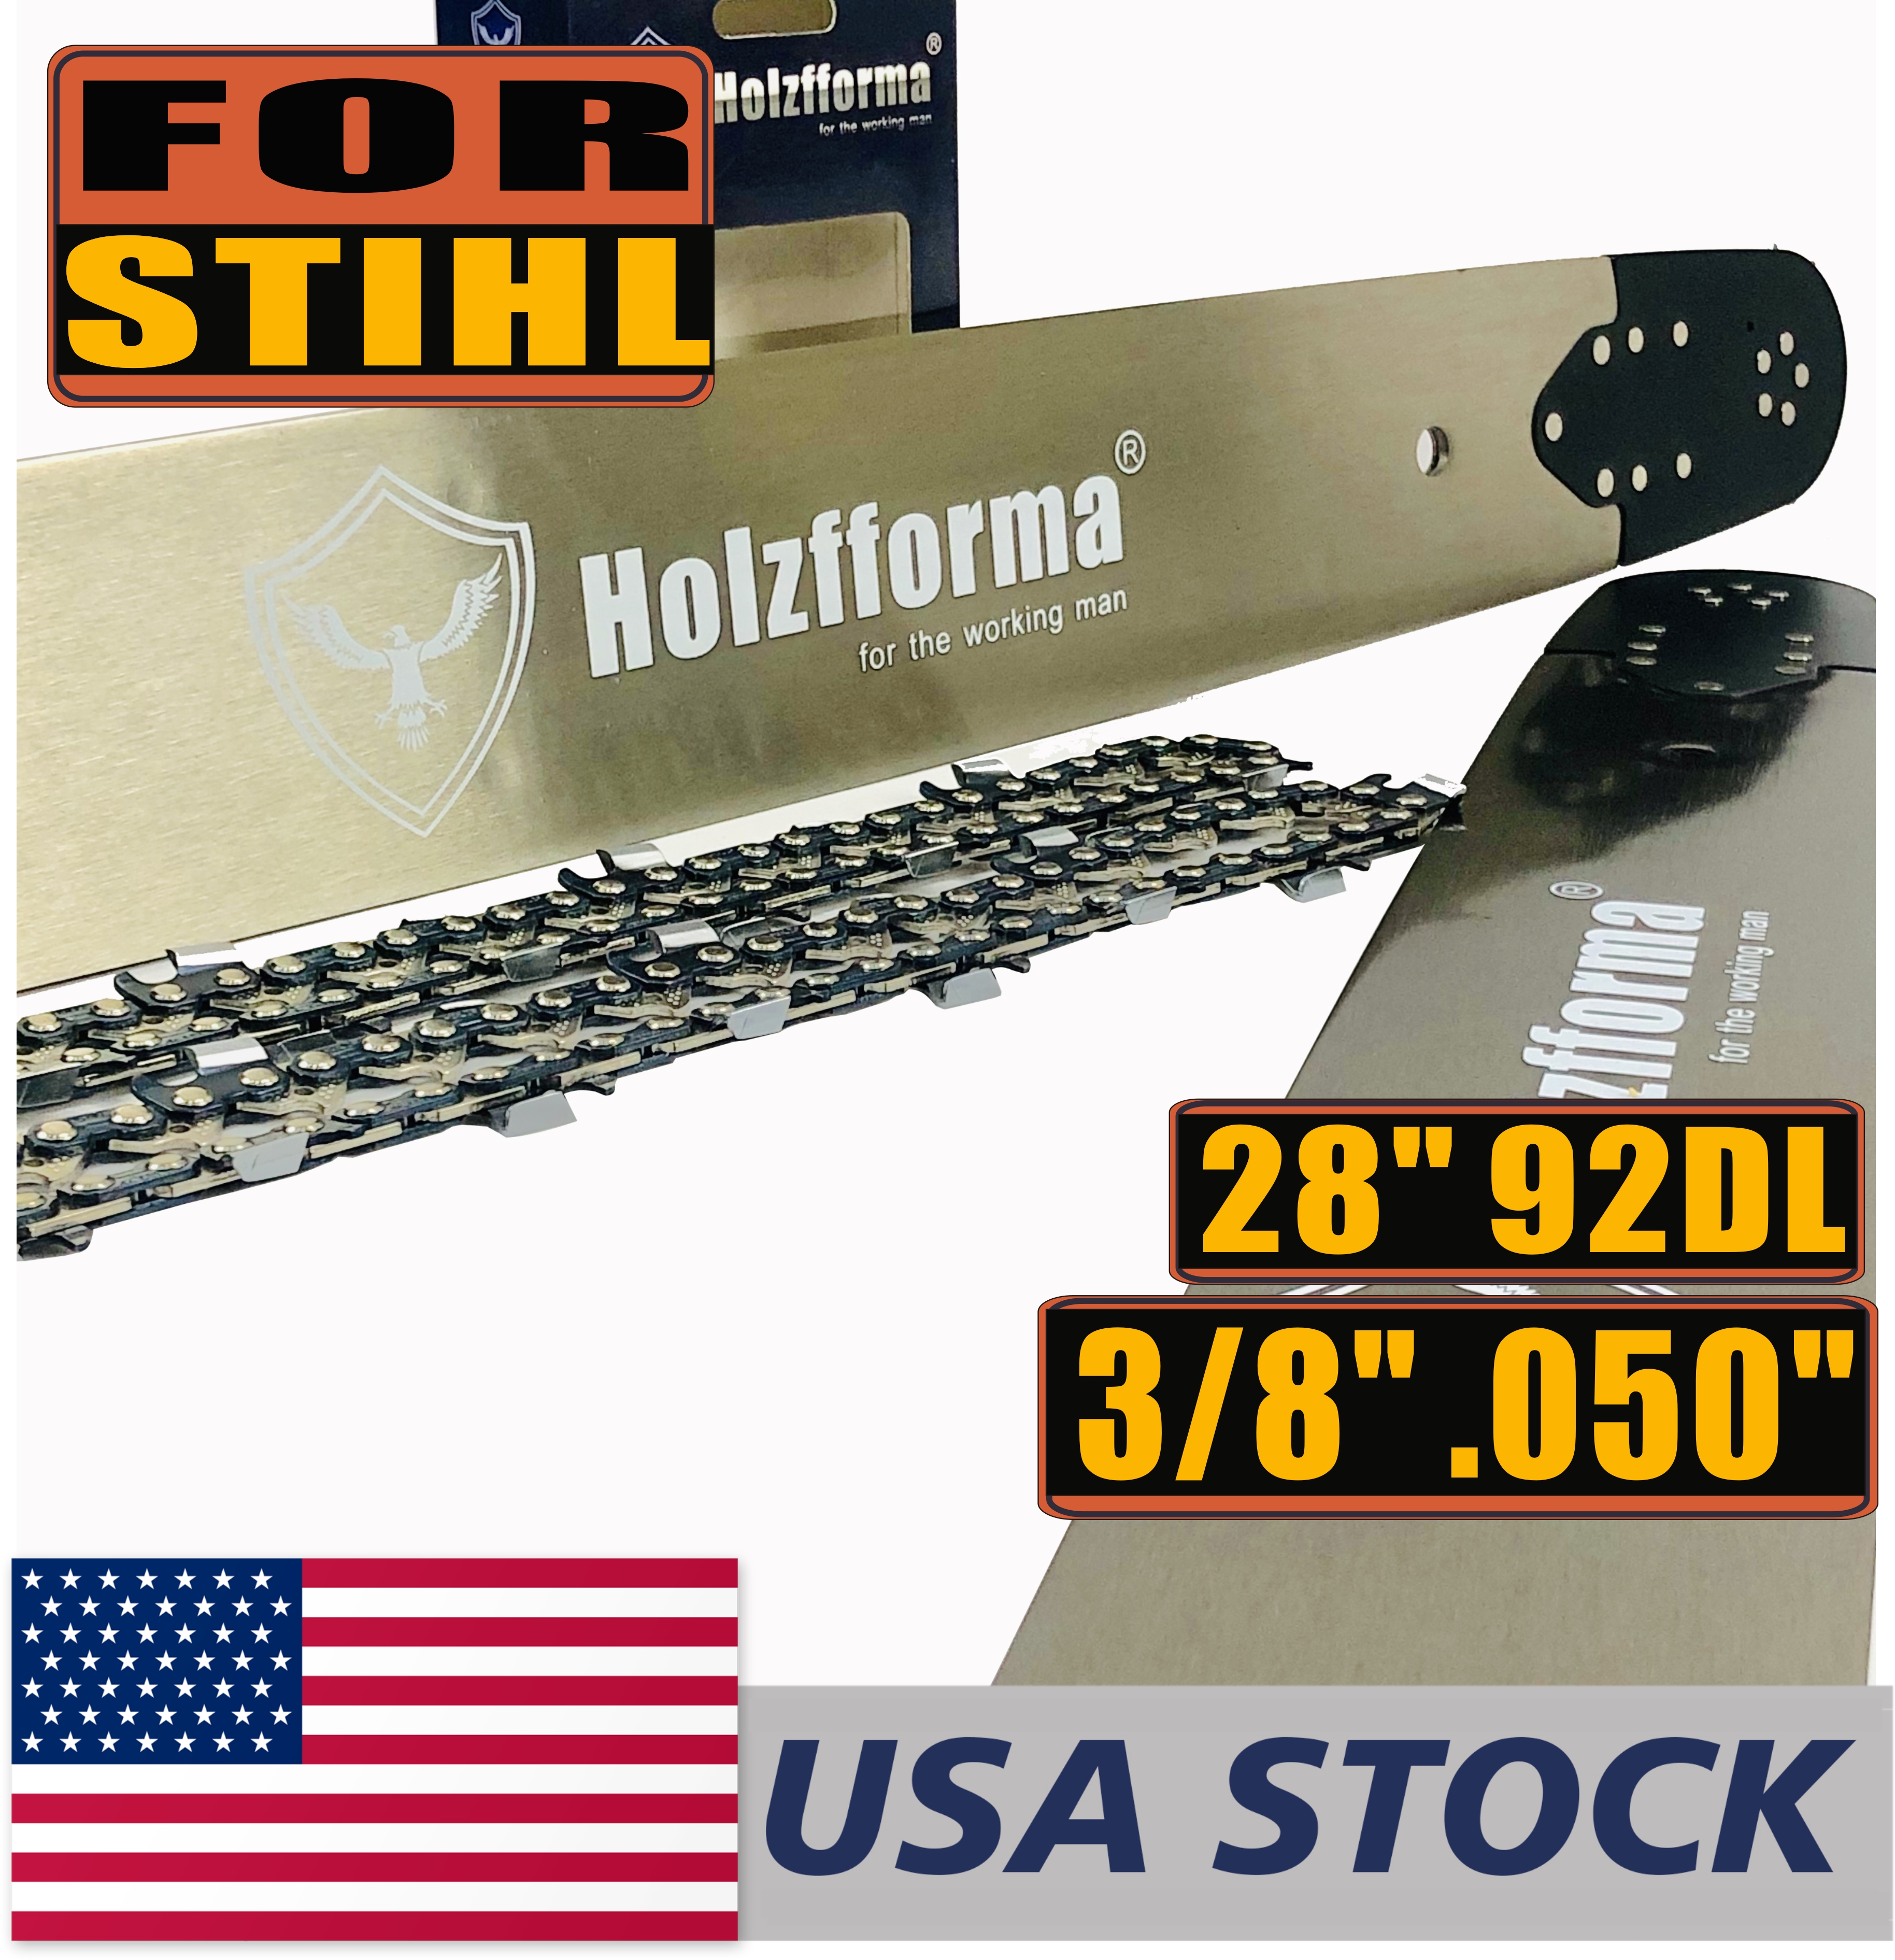 US STOCK - Holzfforma® 28inch 3/8 .050 92DL Bar & Full Chisel Saw Chain Combo For Stihl Chainsaw MS360 MS361 MS362 MS380 MS390 MS440 MS441 MS460 MS461 MS660 MS661 MS650 2-4 Days Delivery Time Fast Shipping For US Customers Only